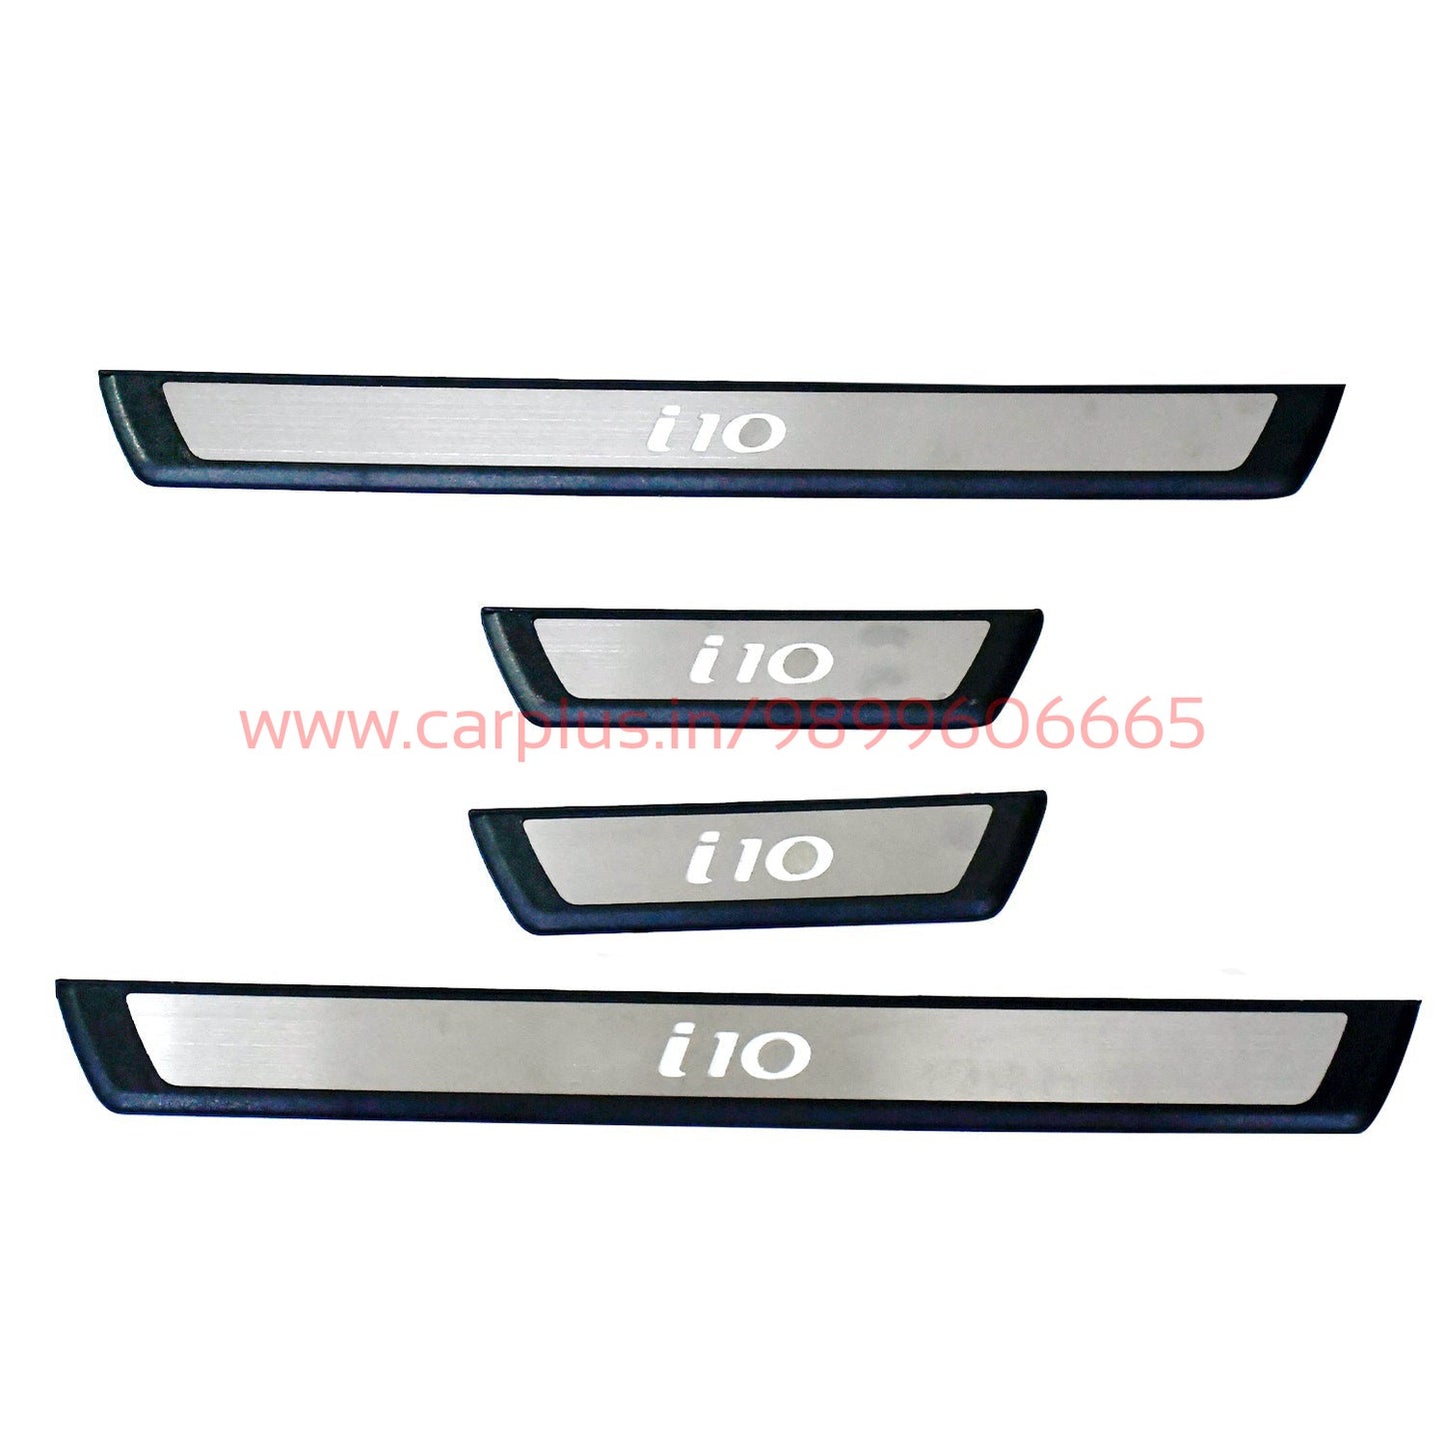 Door sill plates for Toyota Prius Yaris CHR stainless steel brushed chrome